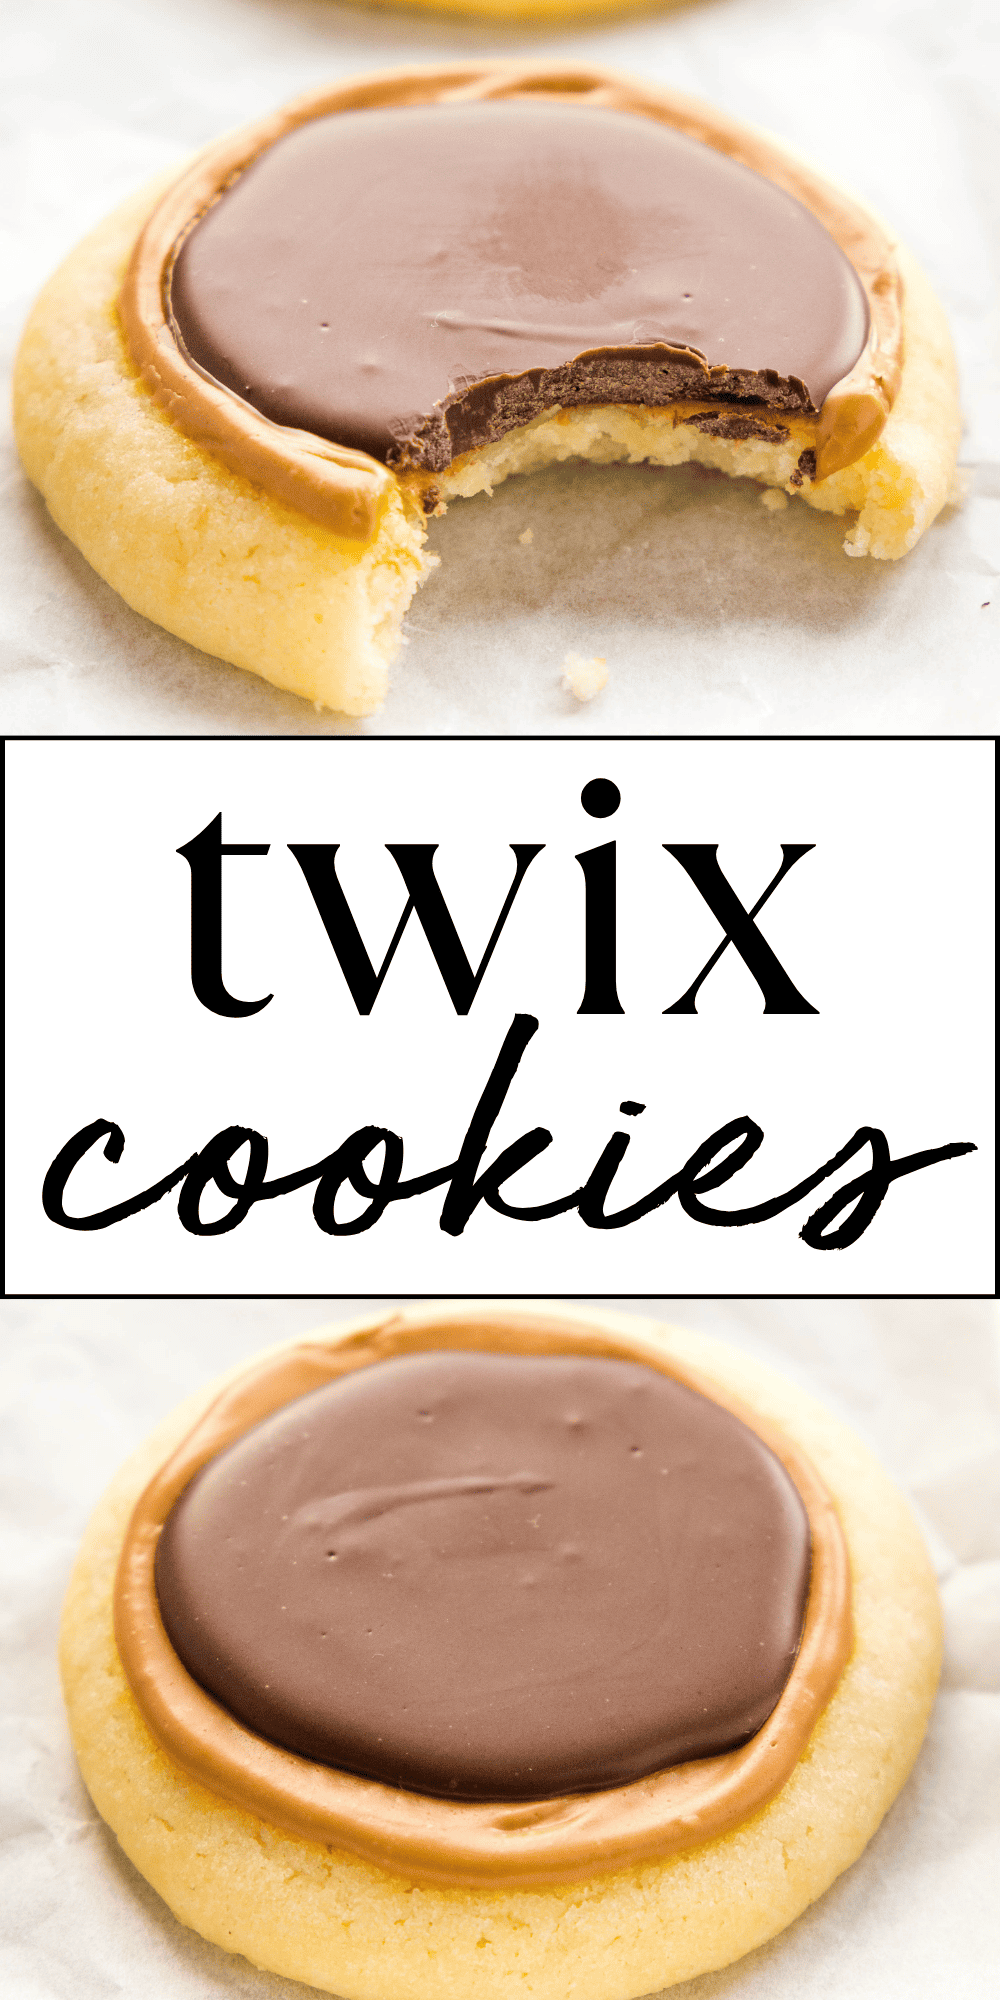 This Twix Cookies recipe is the perfect homemade treat made with a chewy sugar cookie base, creamy caramel and melted chocolate - just like a Twix bar! Recipe from thebusybaker.ca! #twixbar #twixcookies #twixcookierecipe #homemadecandybar #cookies #cookierecipe #easycookierecipe #chocolatecaramelcookies via @busybakerblog